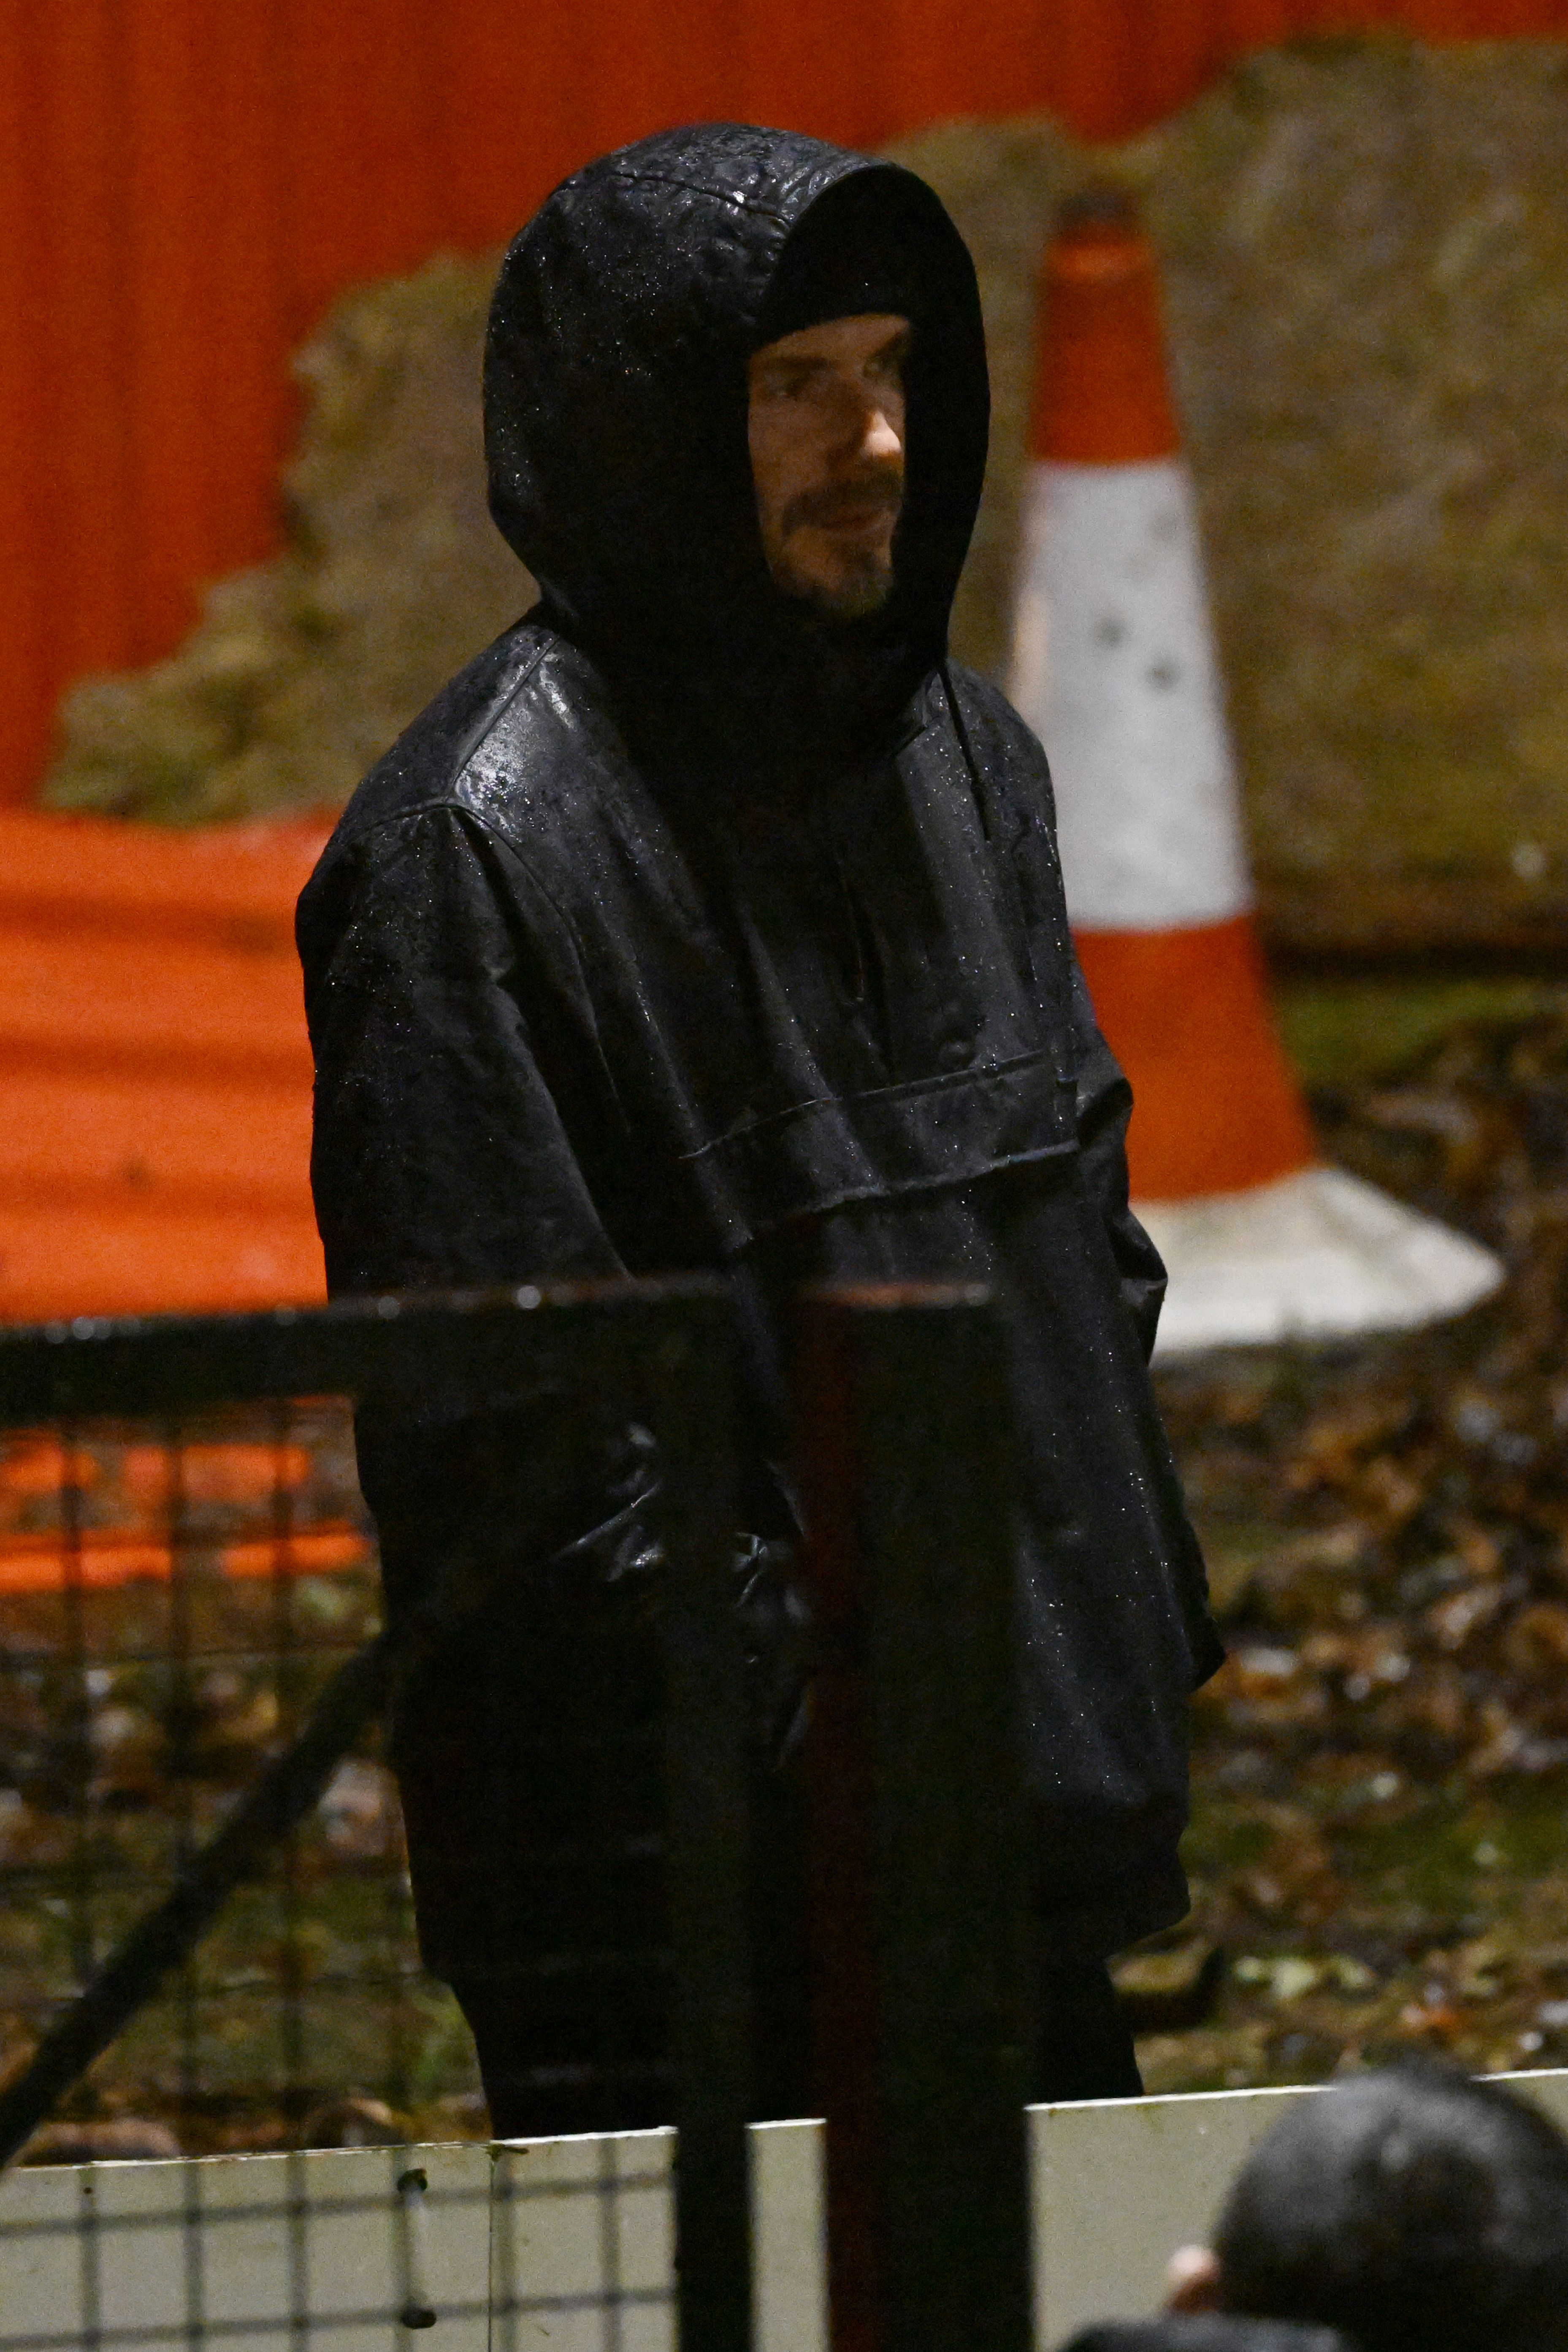 David Beckham watches Romeo play in Brentford B's team in Brentford on January 10, 2023 | Source: Getty Images